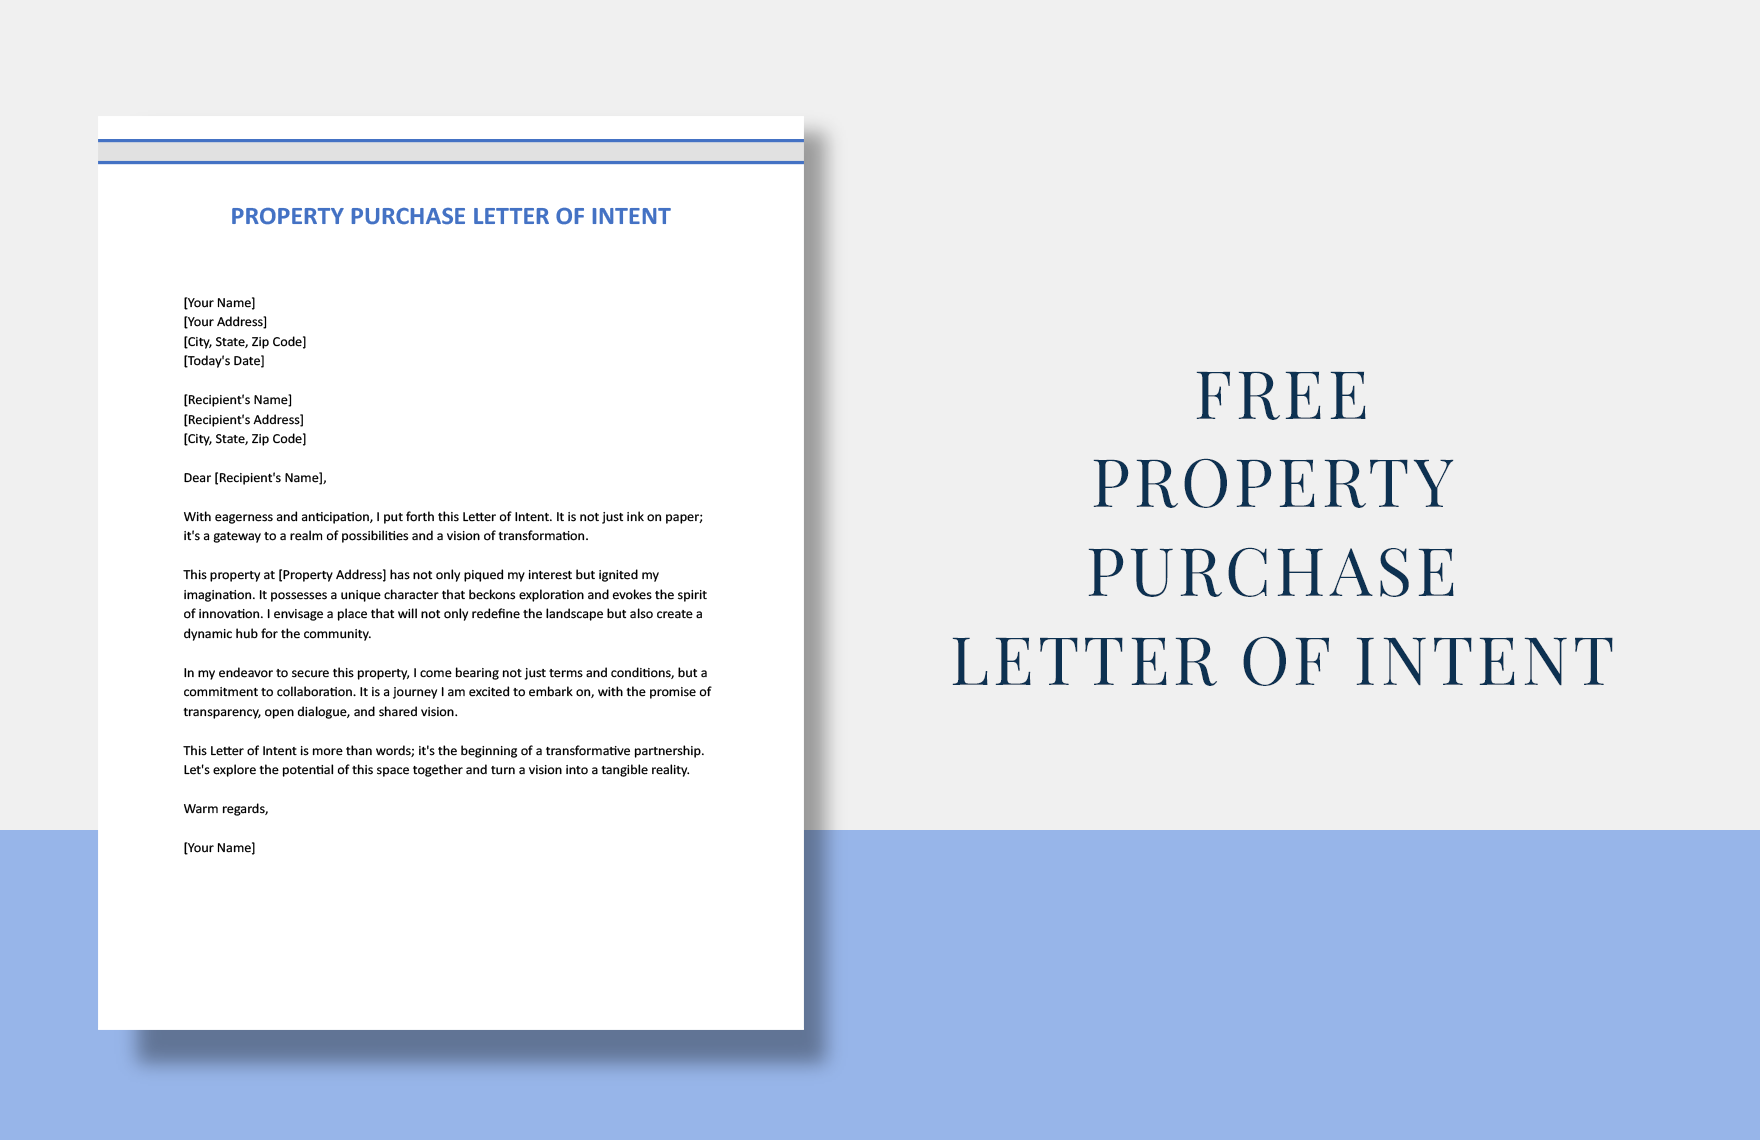 Property Purchase Letter Of Intent in Word, Google Docs